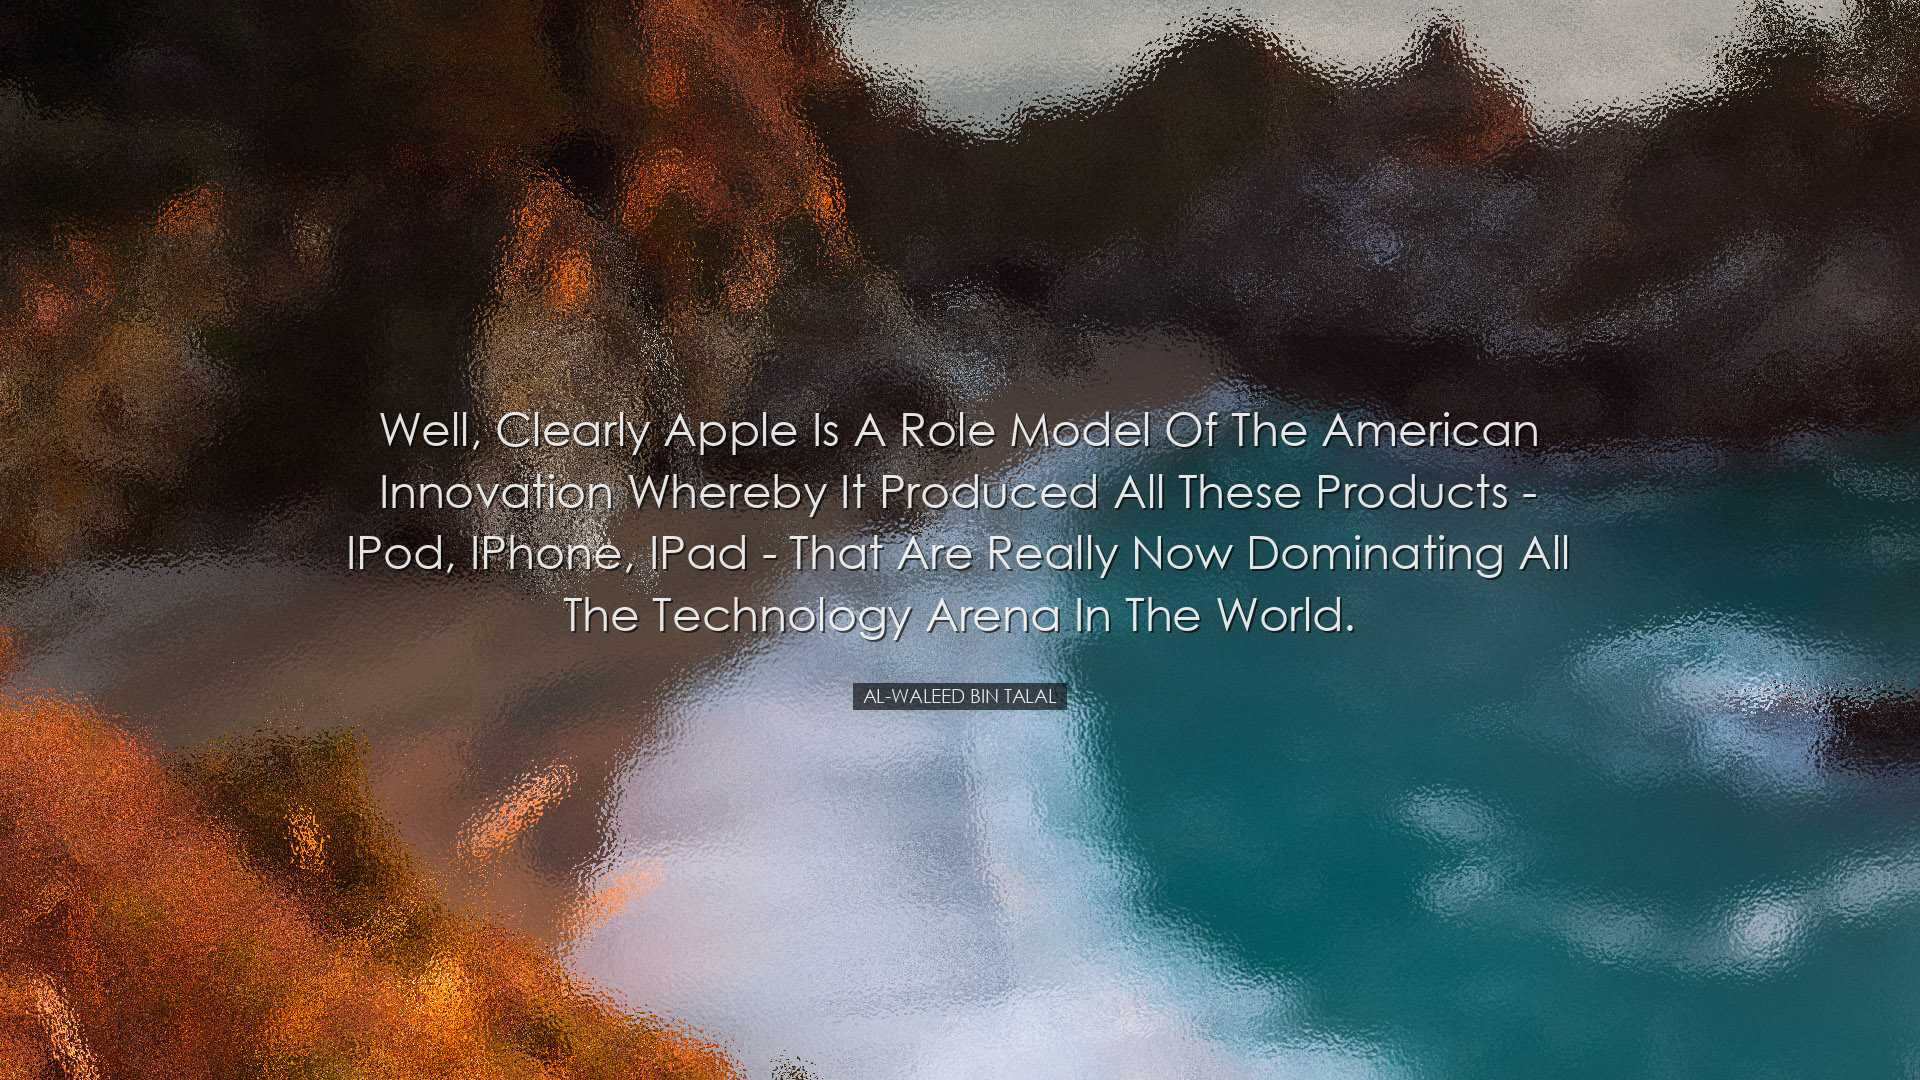 Well, clearly Apple is a role model of the American innovation whe